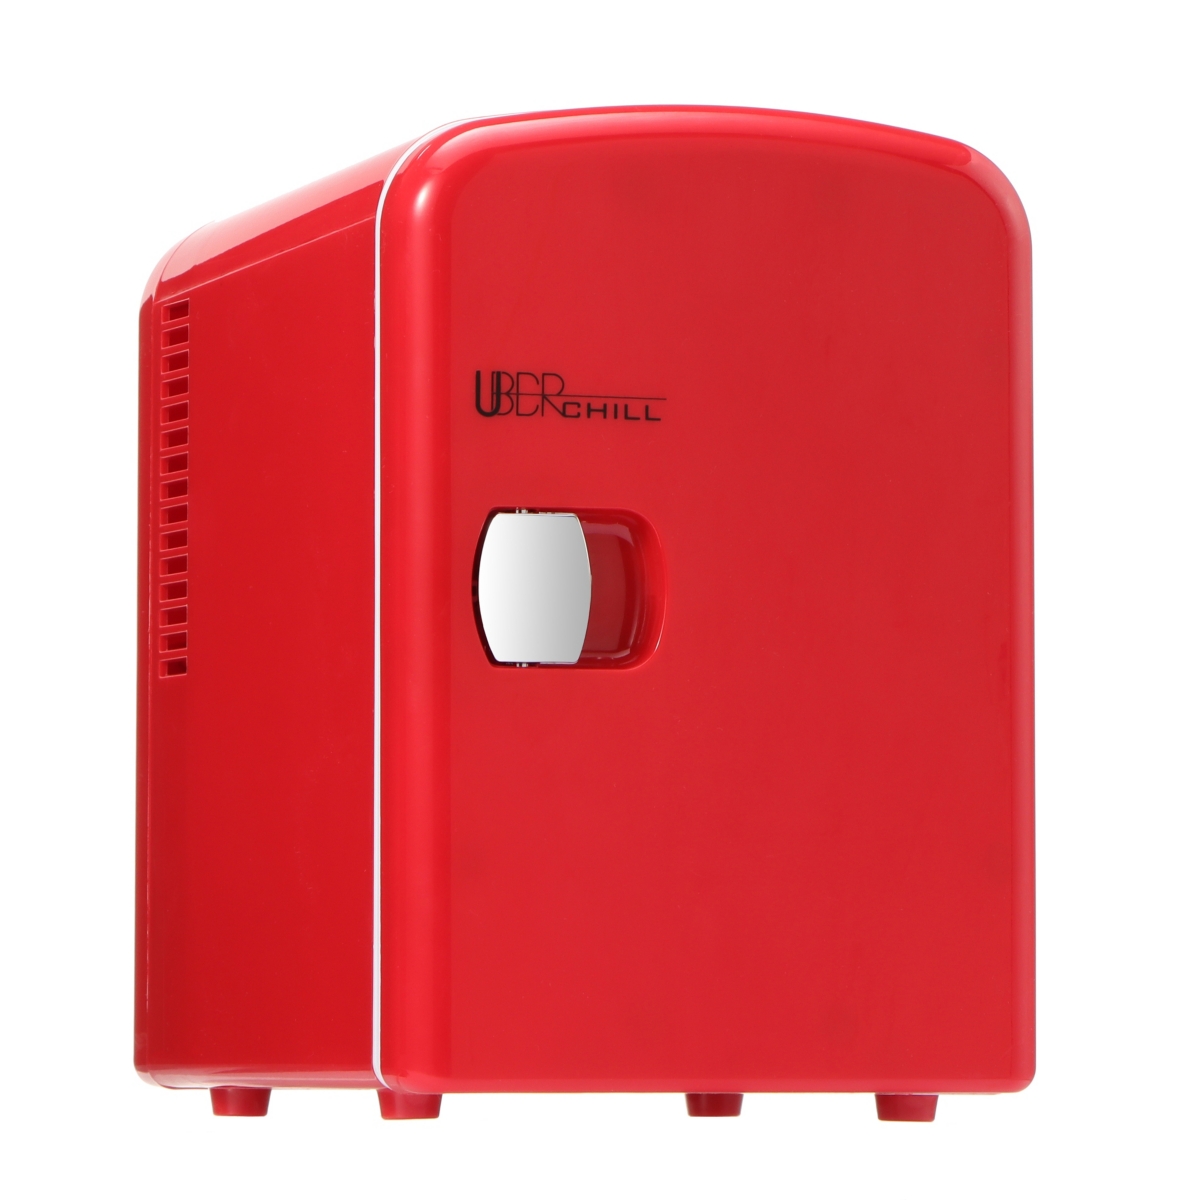 Uber Appliance Uber Chill Personal And Portable Mini Fridge Cooler And Warmer - 6-can Capacity In Red